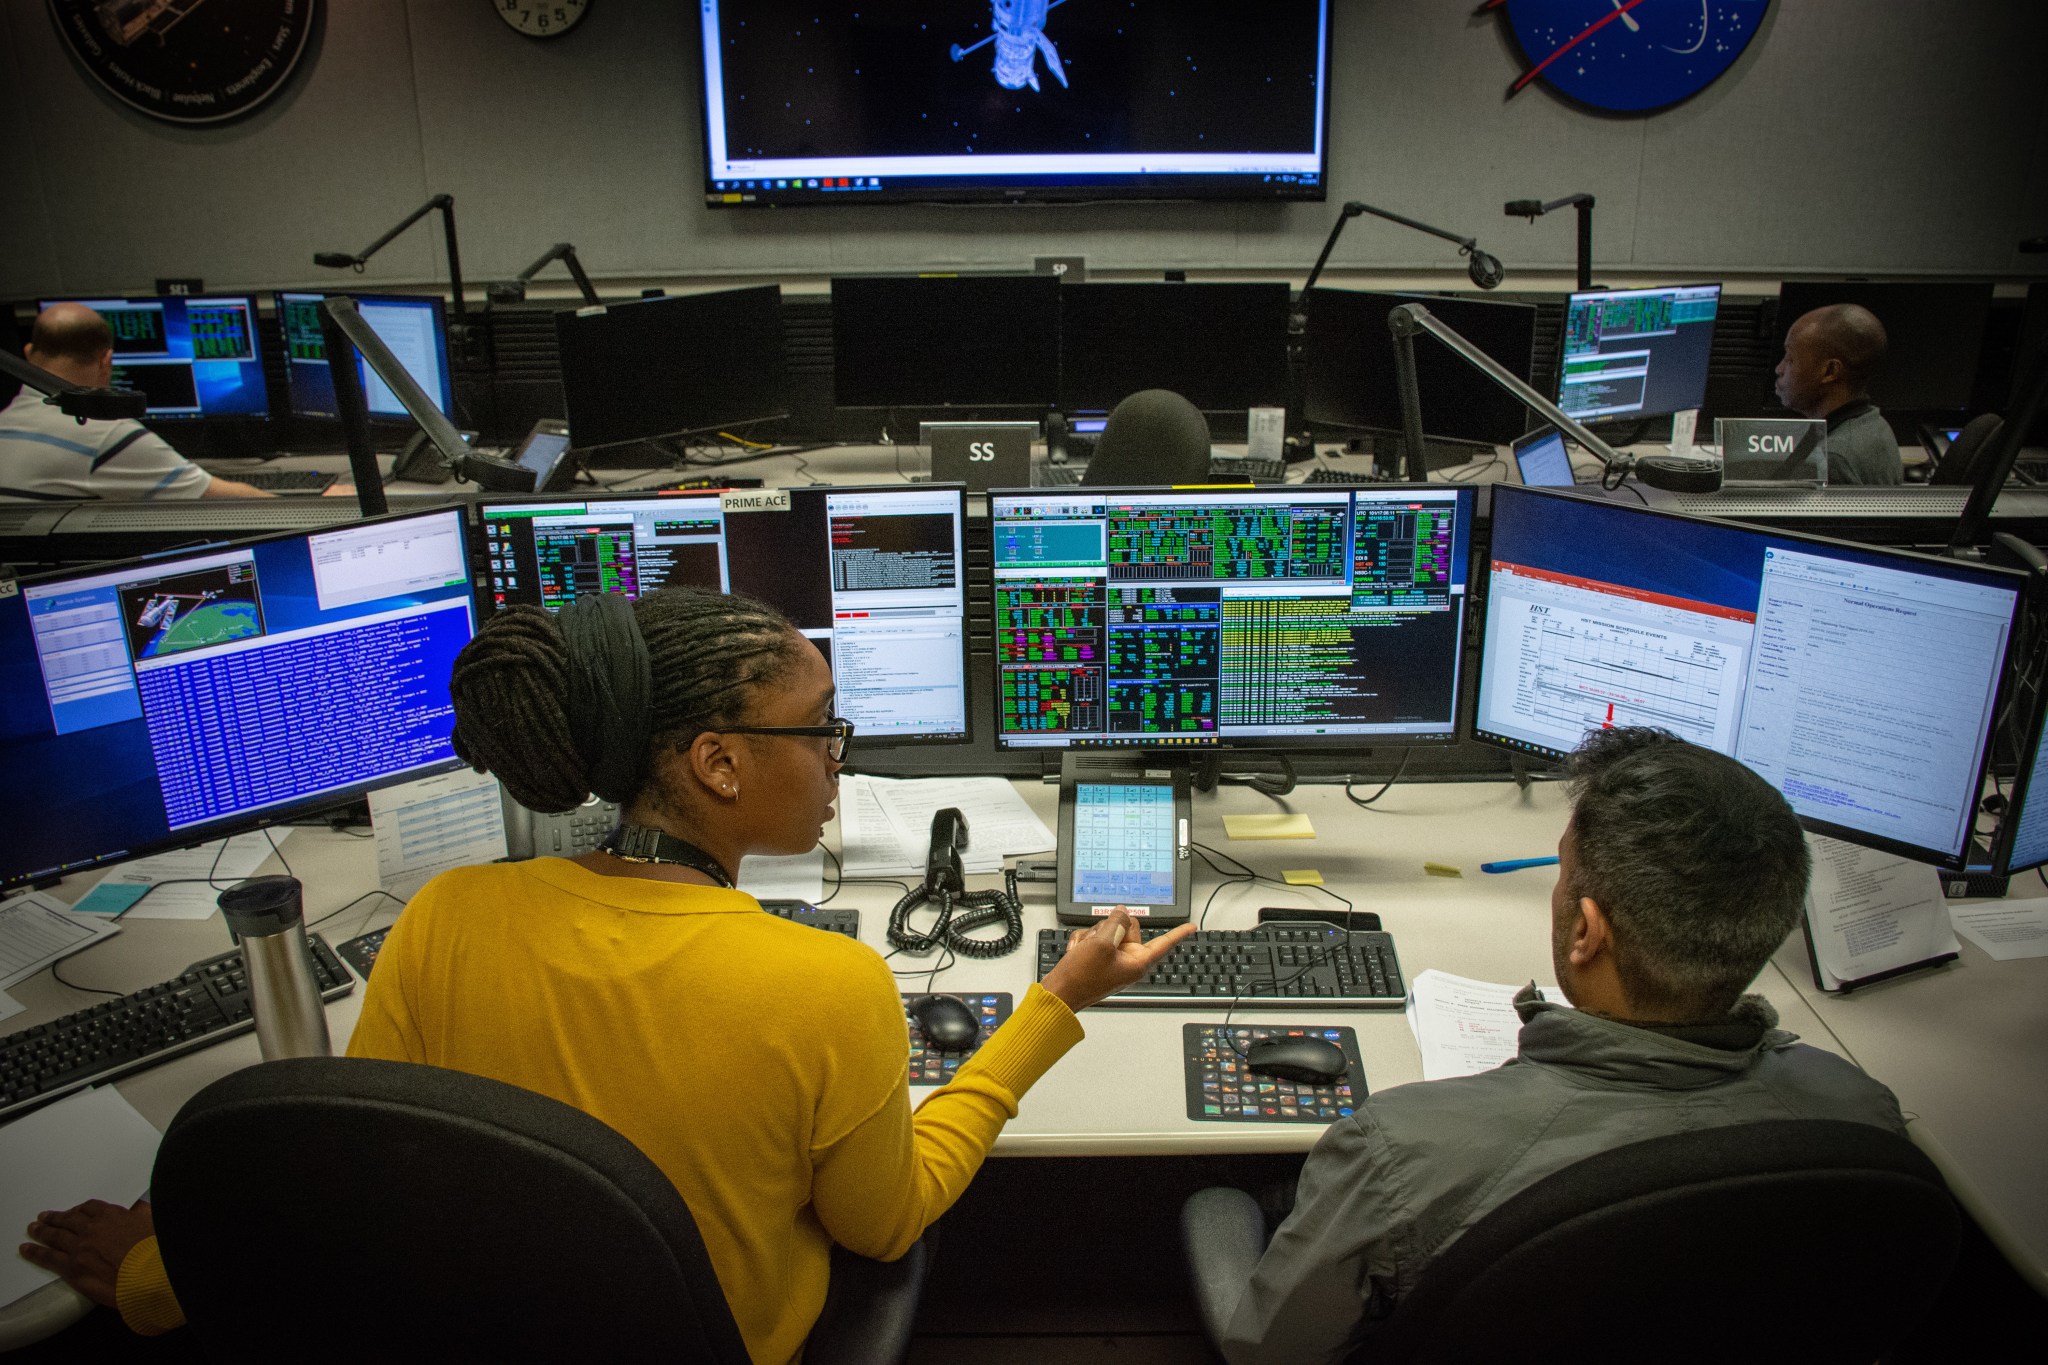 Hubble mission engineer Phanthom Donald, a Black woman with long black dreadlocks in a large bun on the back of her head, gestures and speaks to a fellow engineer sitting in front of several large computer monitors. 